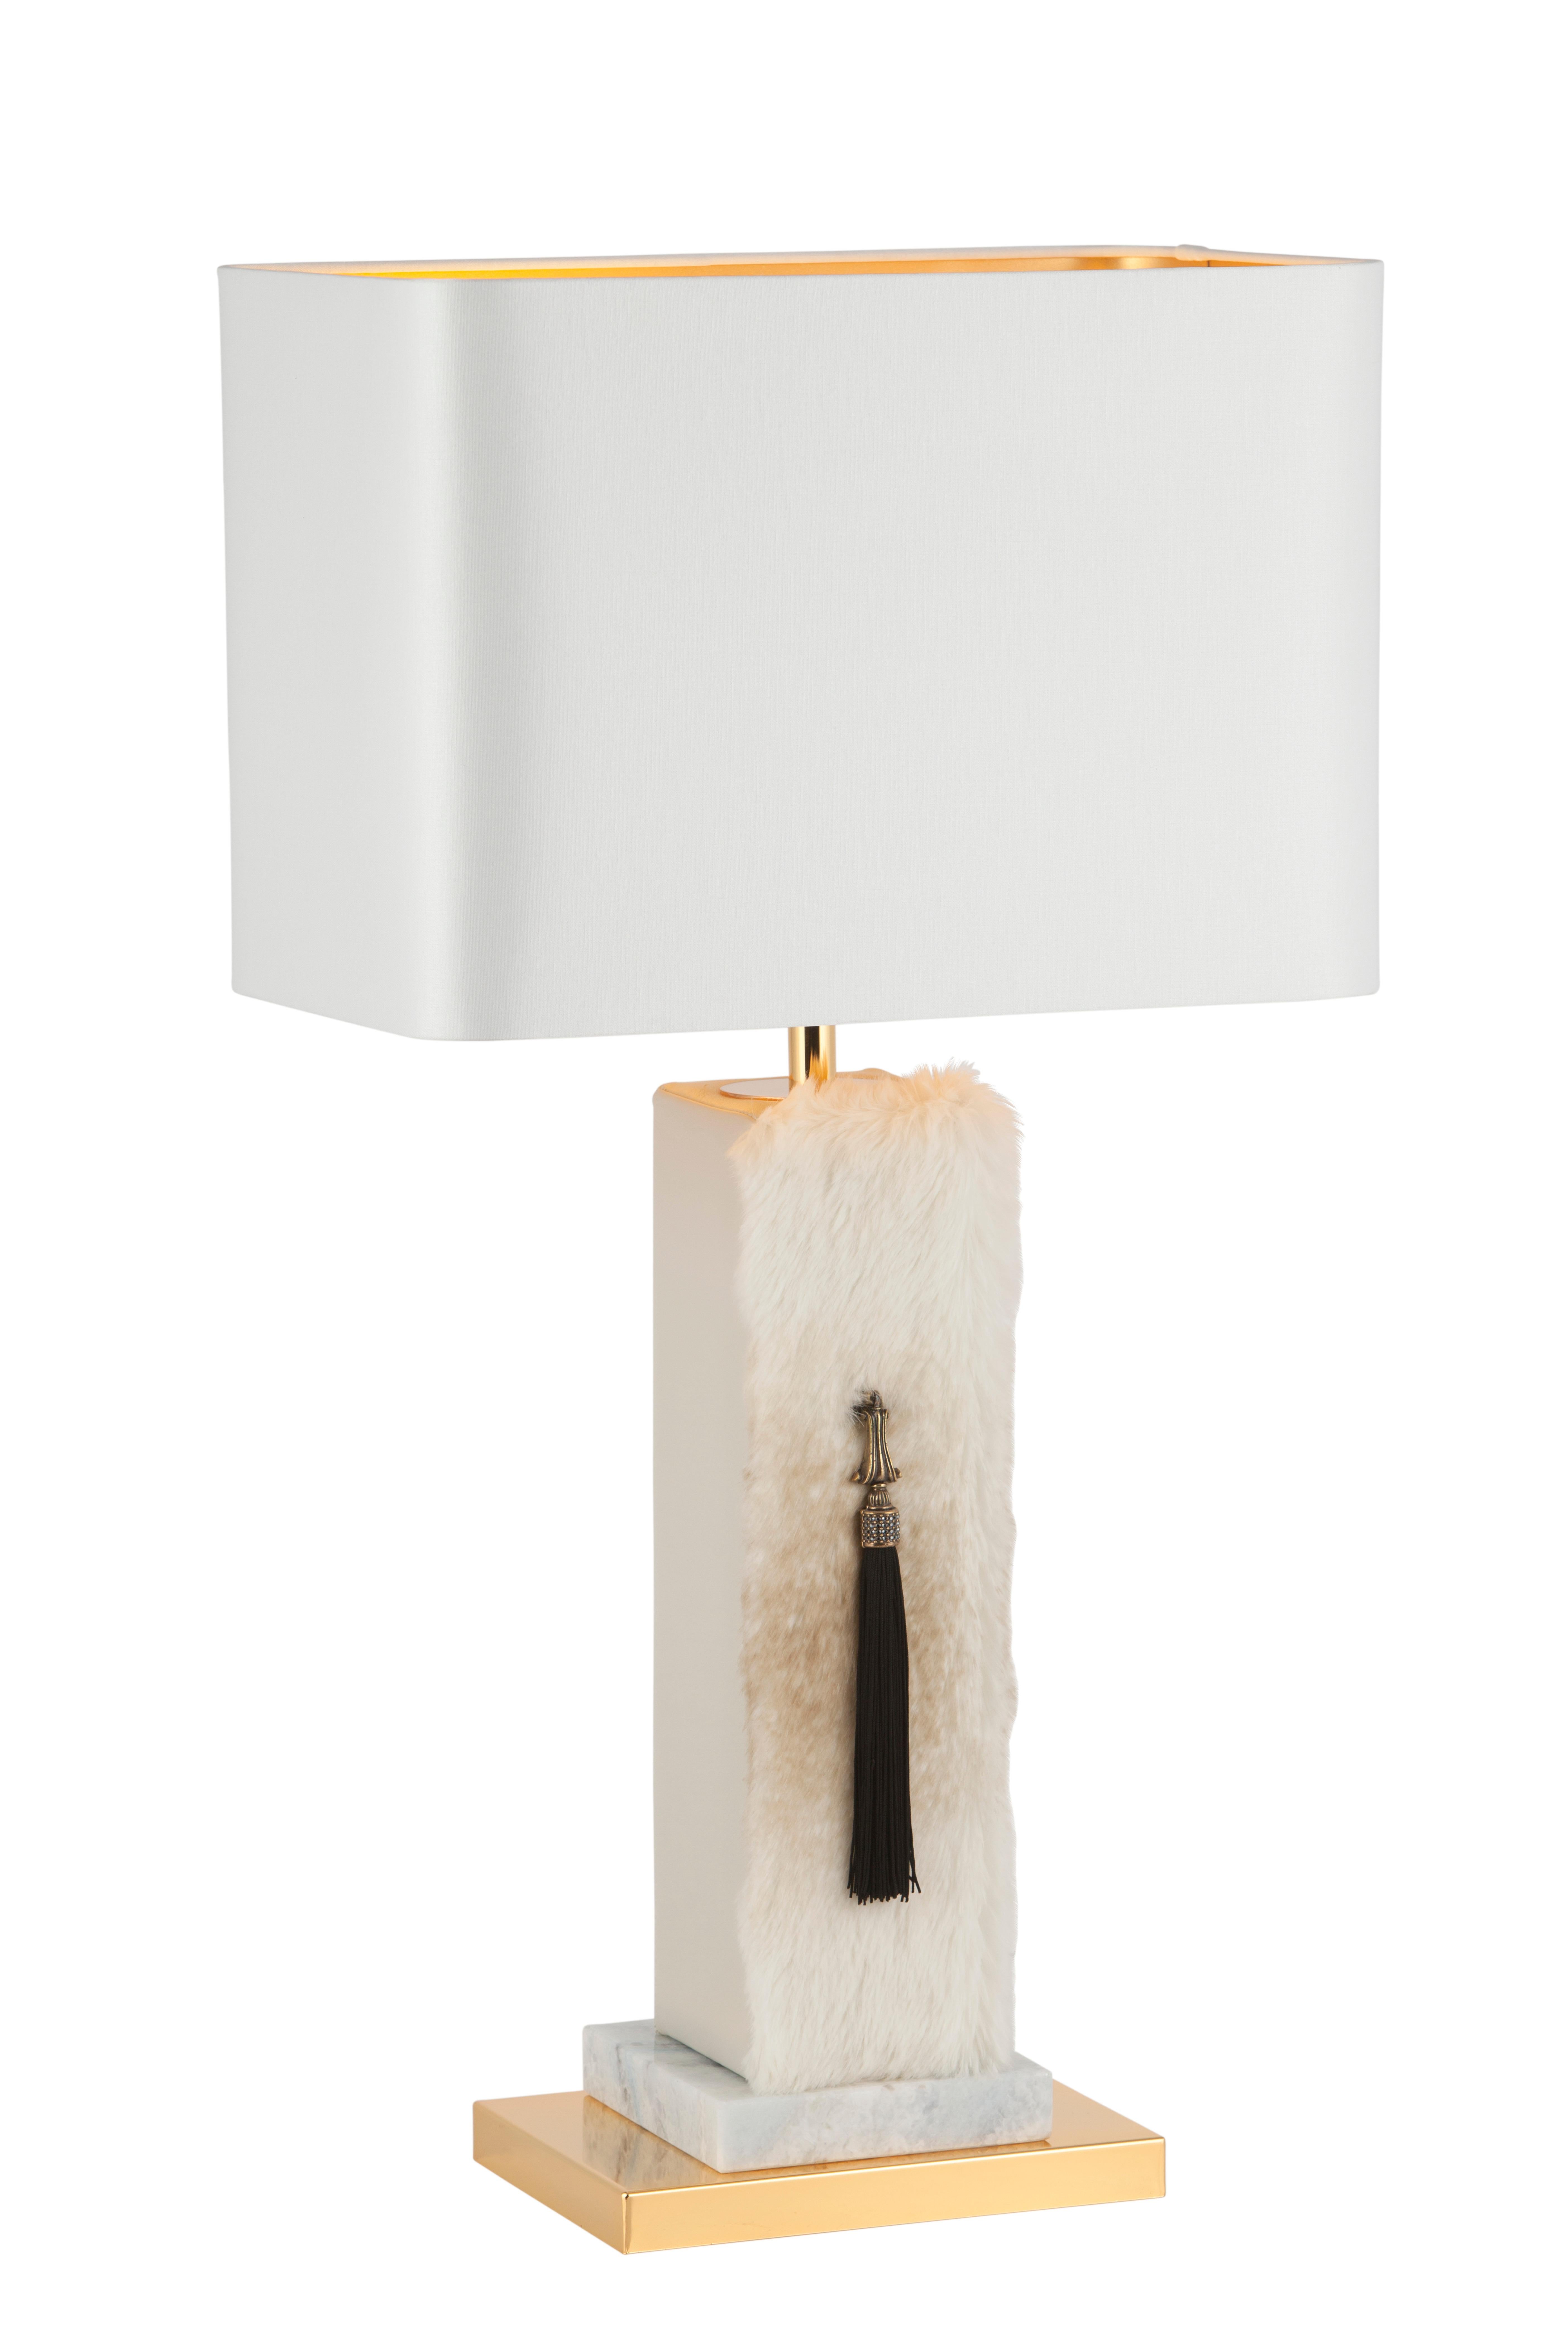 Modern Set of 2 Art Deco Matos Table Lamp, Beige Lampshade, Faux Fur, by Greenapple For Sale